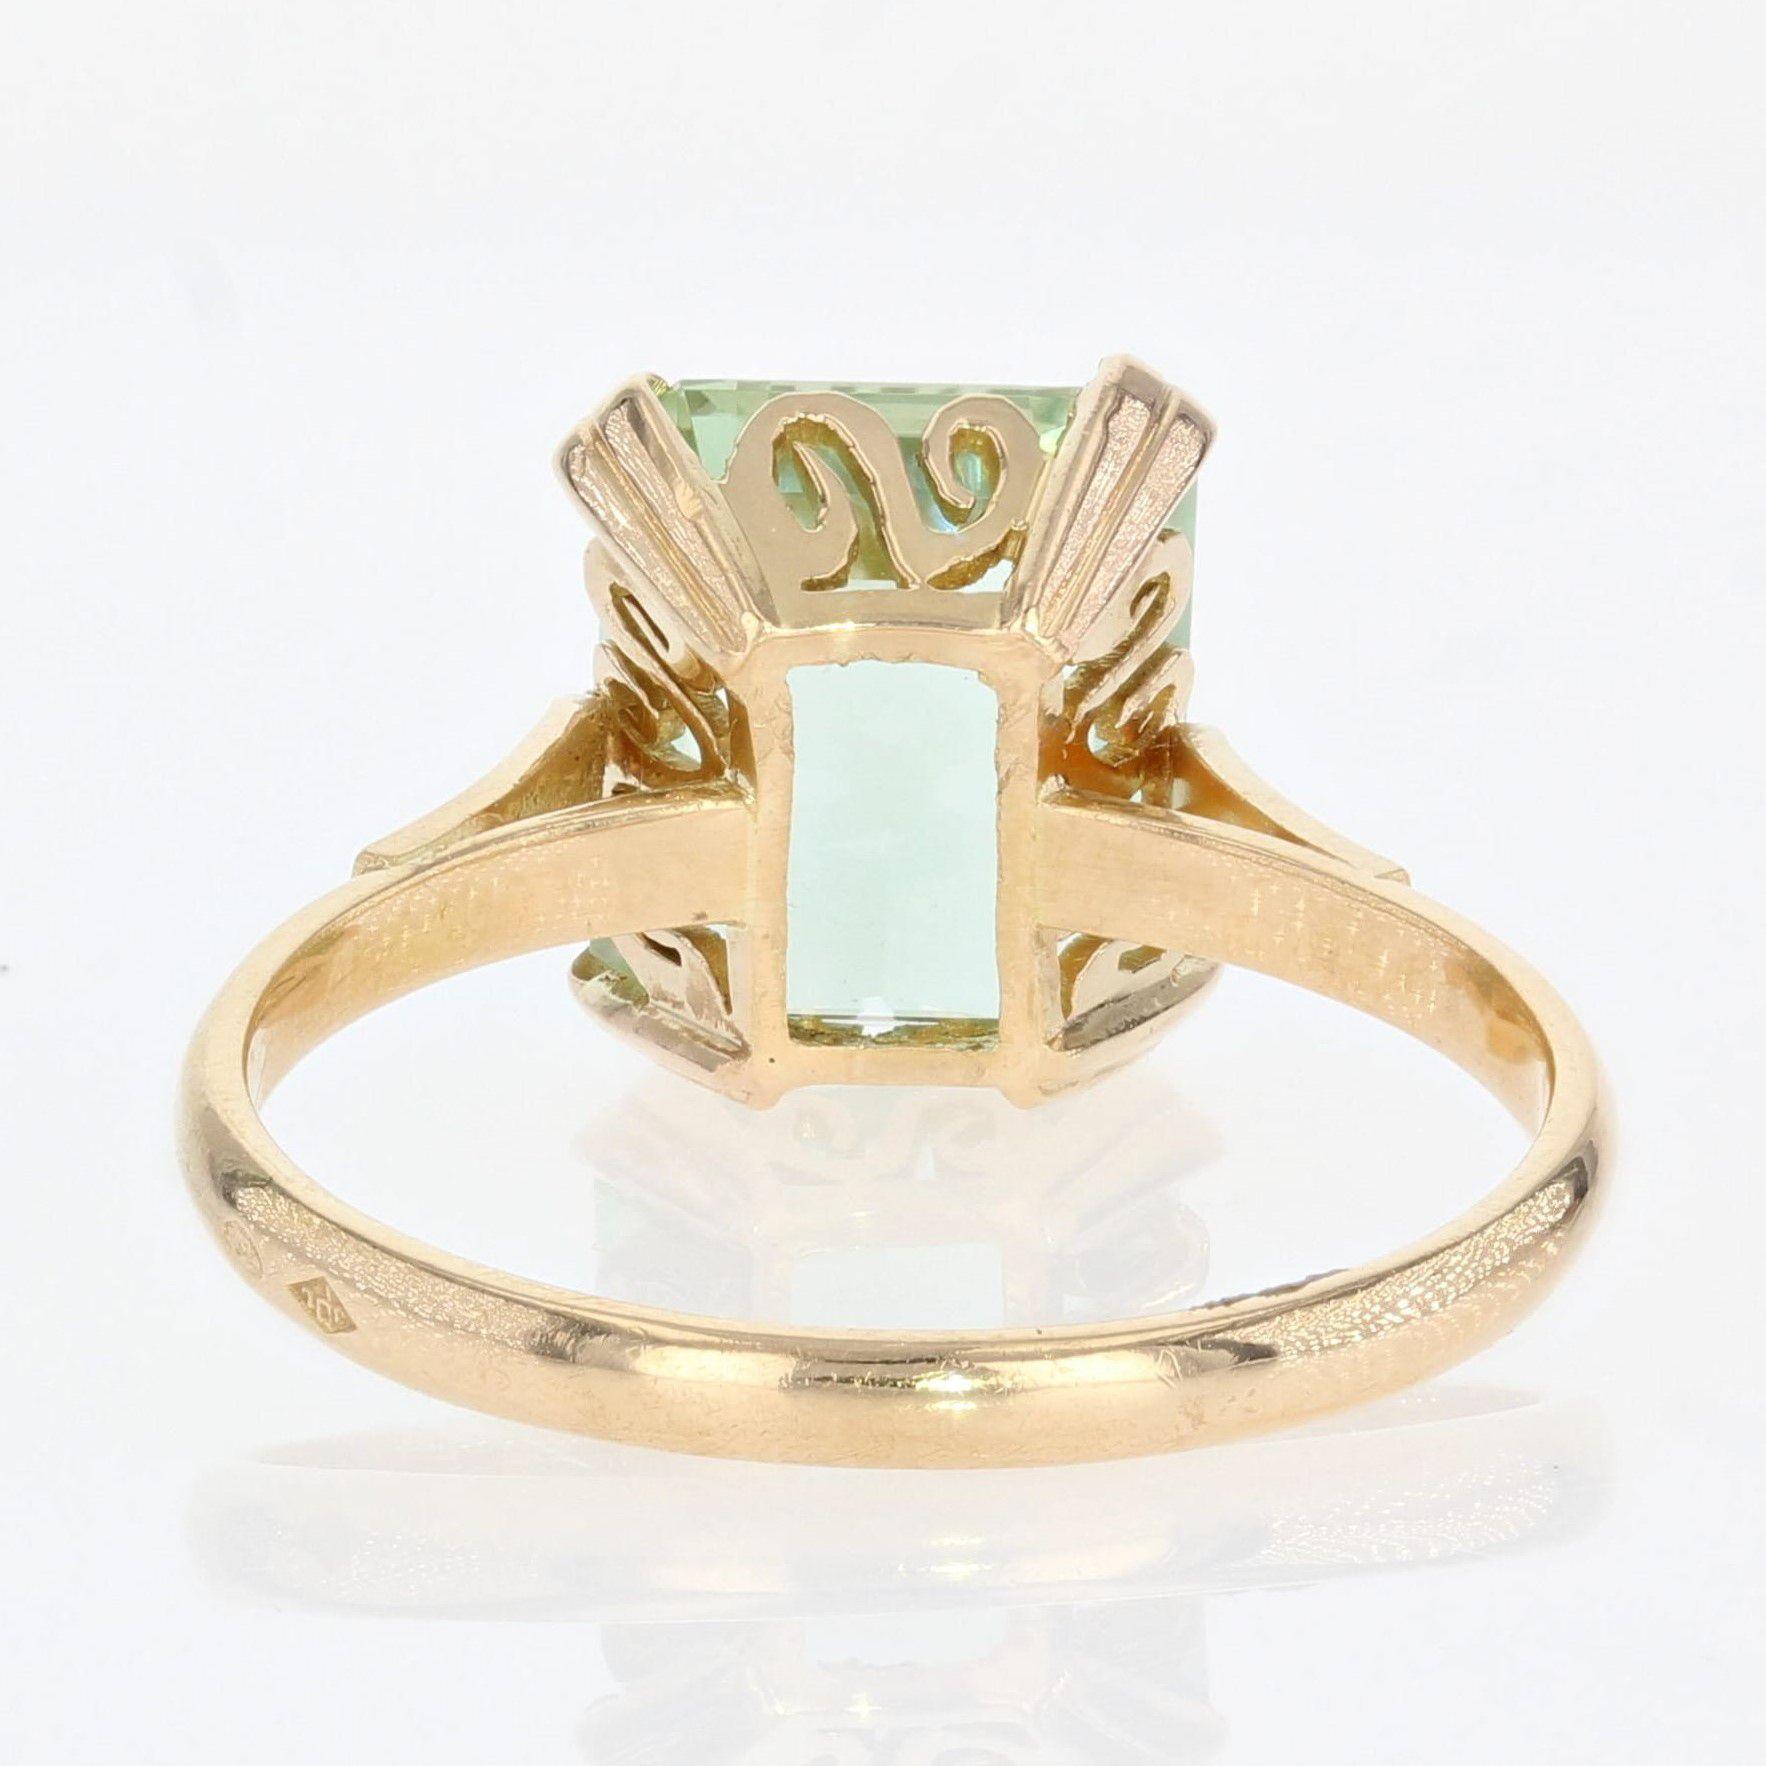 French 1960s 5.82 Carat Watermint Tourmaline 18 Karat Yellow Gold Ring For Sale 3